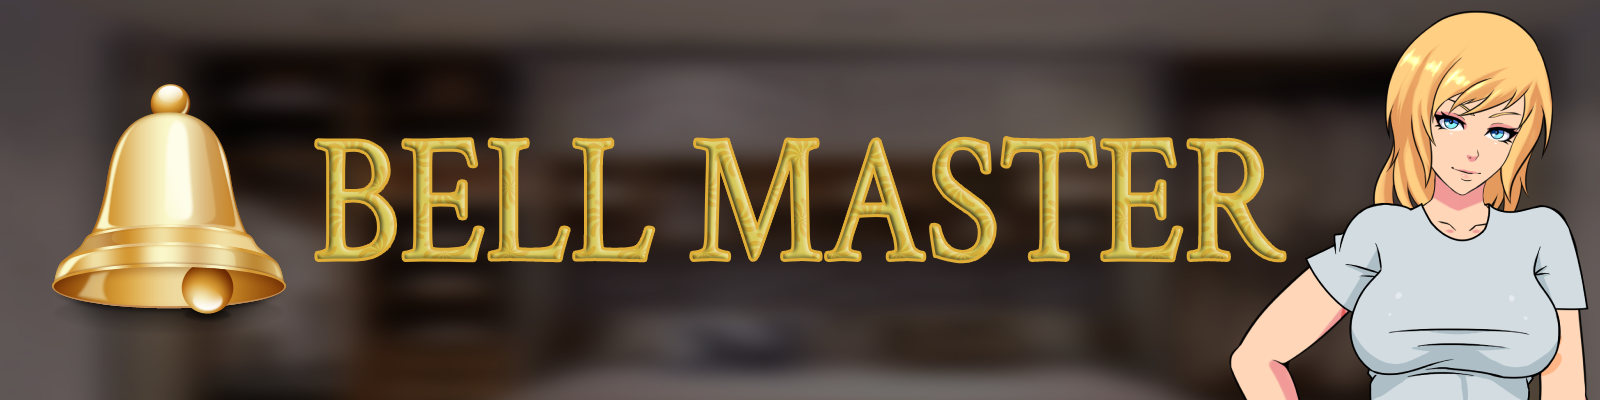 Bell Master - Version 1.0.1 by Mip Win32/Win64/Mac/Linux/Android Porn Game